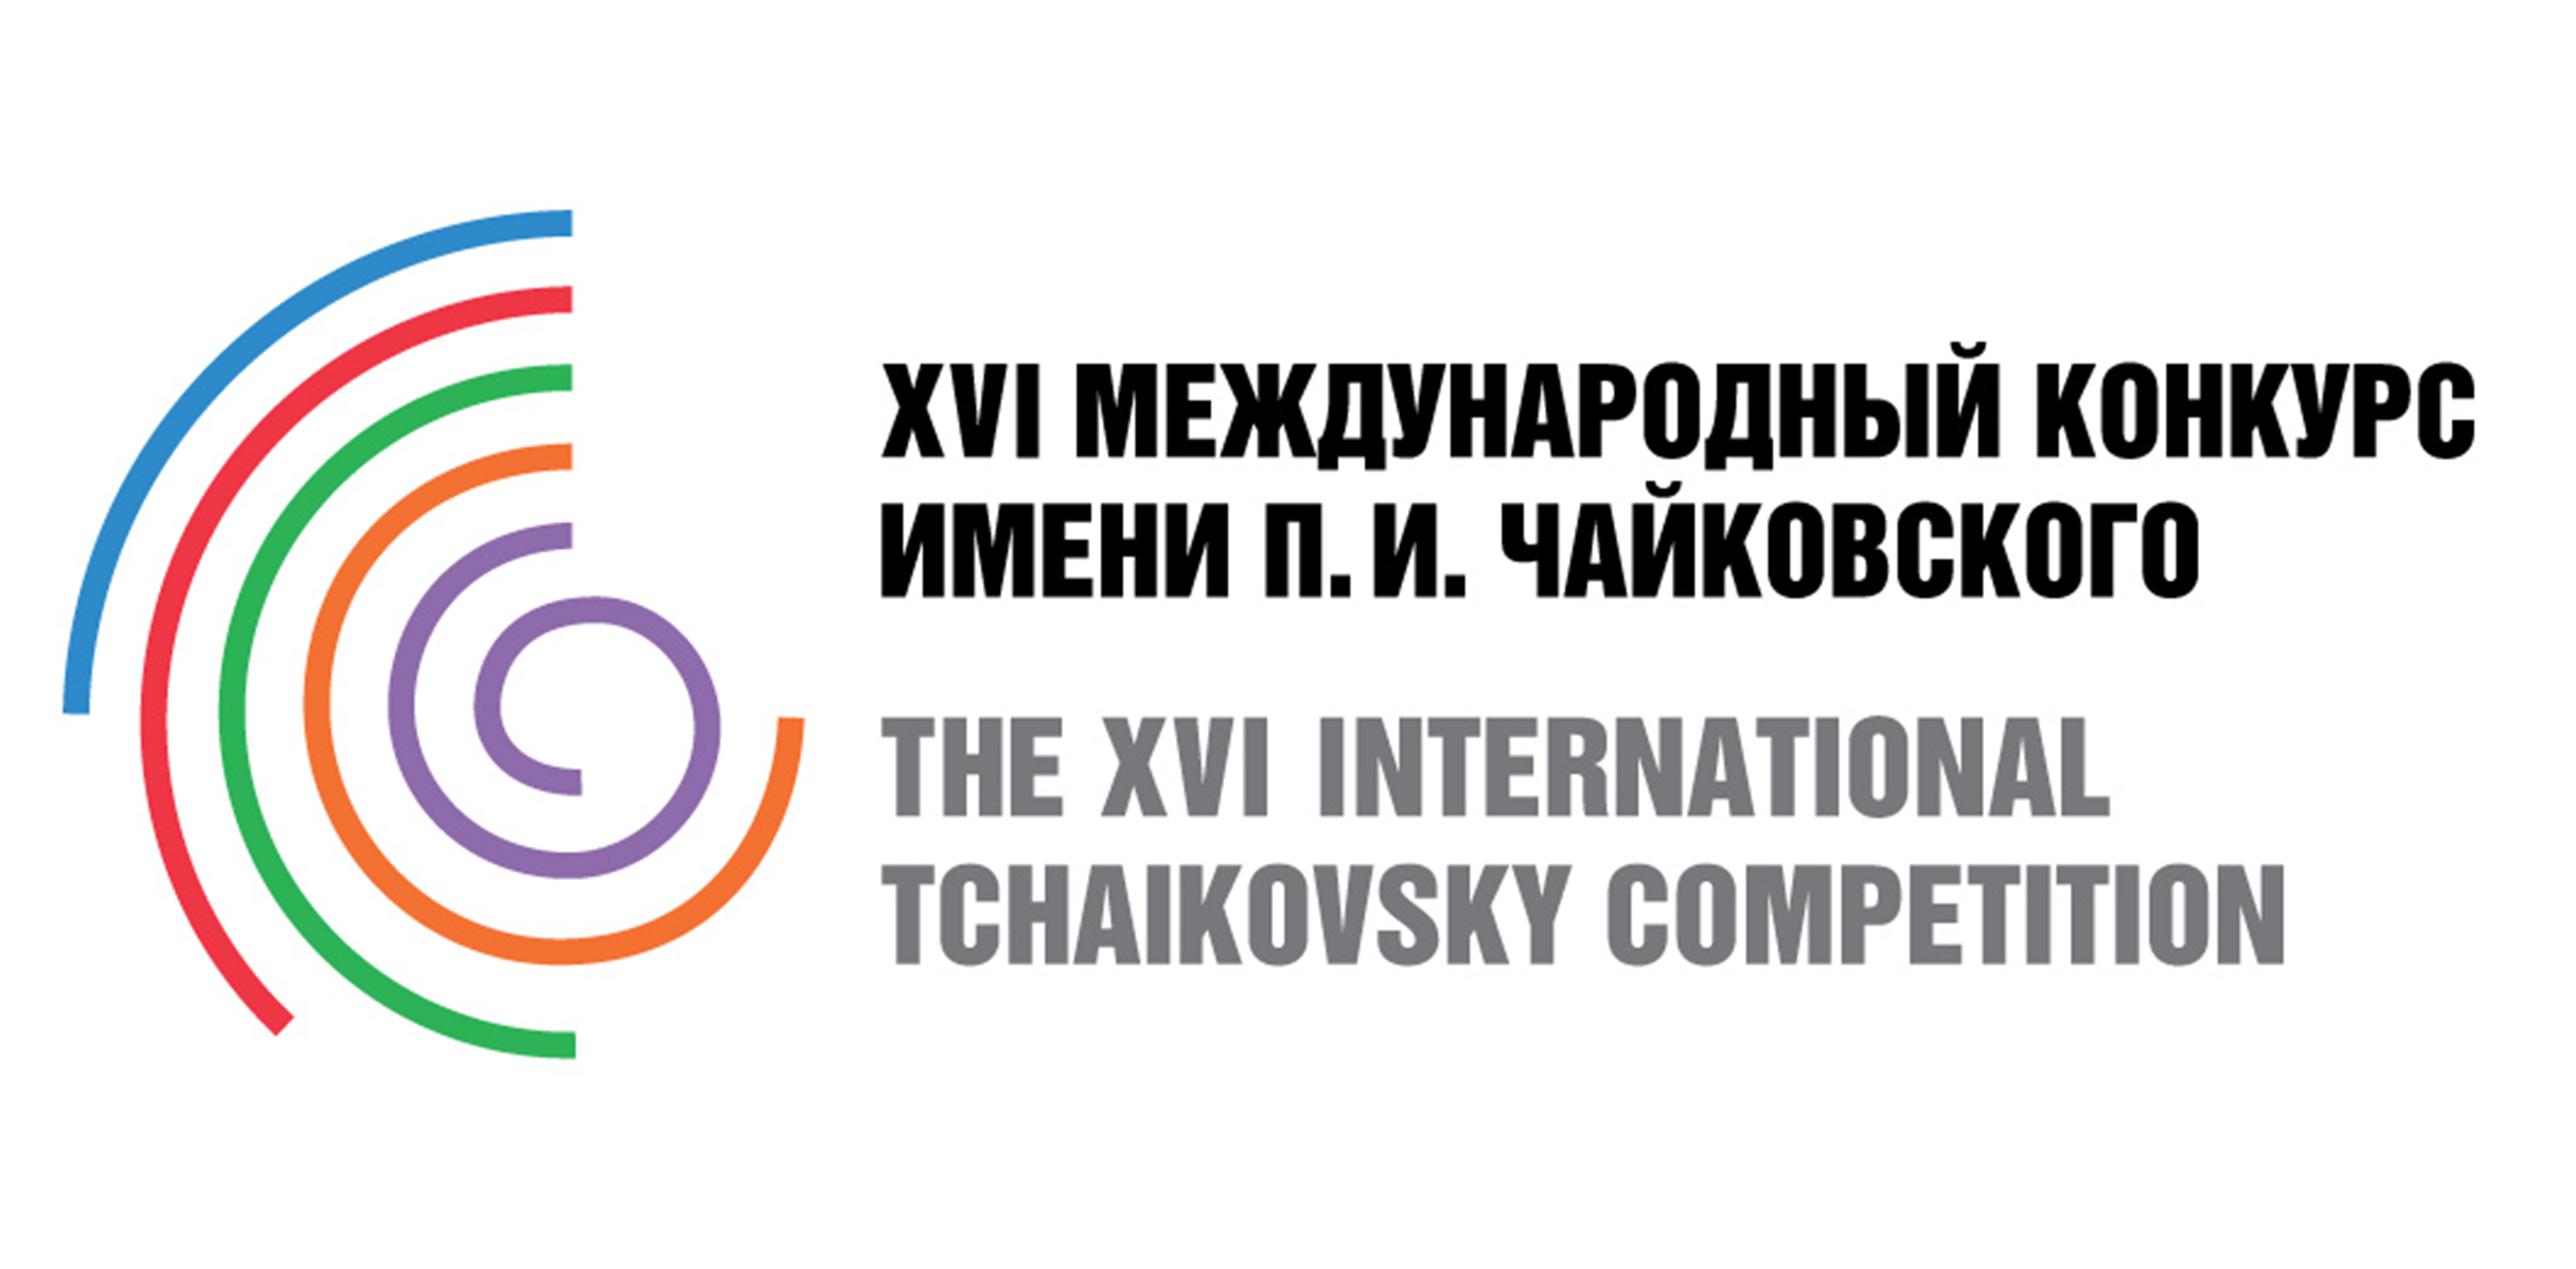 Tickets for the Gala concert of laureates of the International Tchaikovsky Competition went on sale